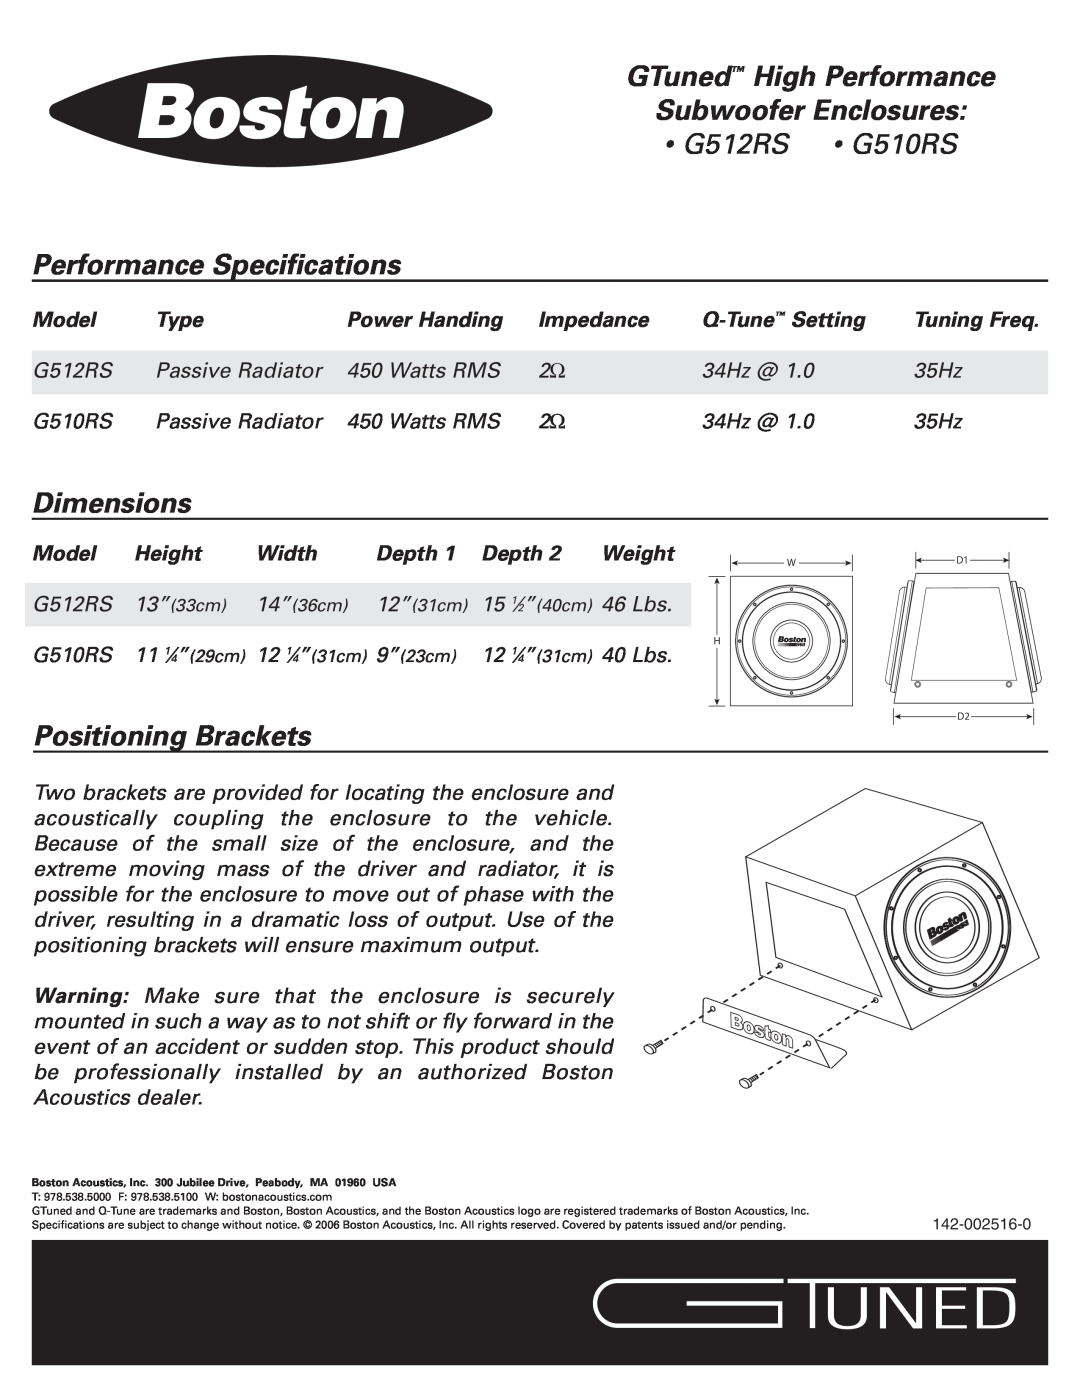 Boston Acoustics G512RS G510RS, GTuned High Performance Subwoofer Enclosures, Performance Specifications, Dimensions 